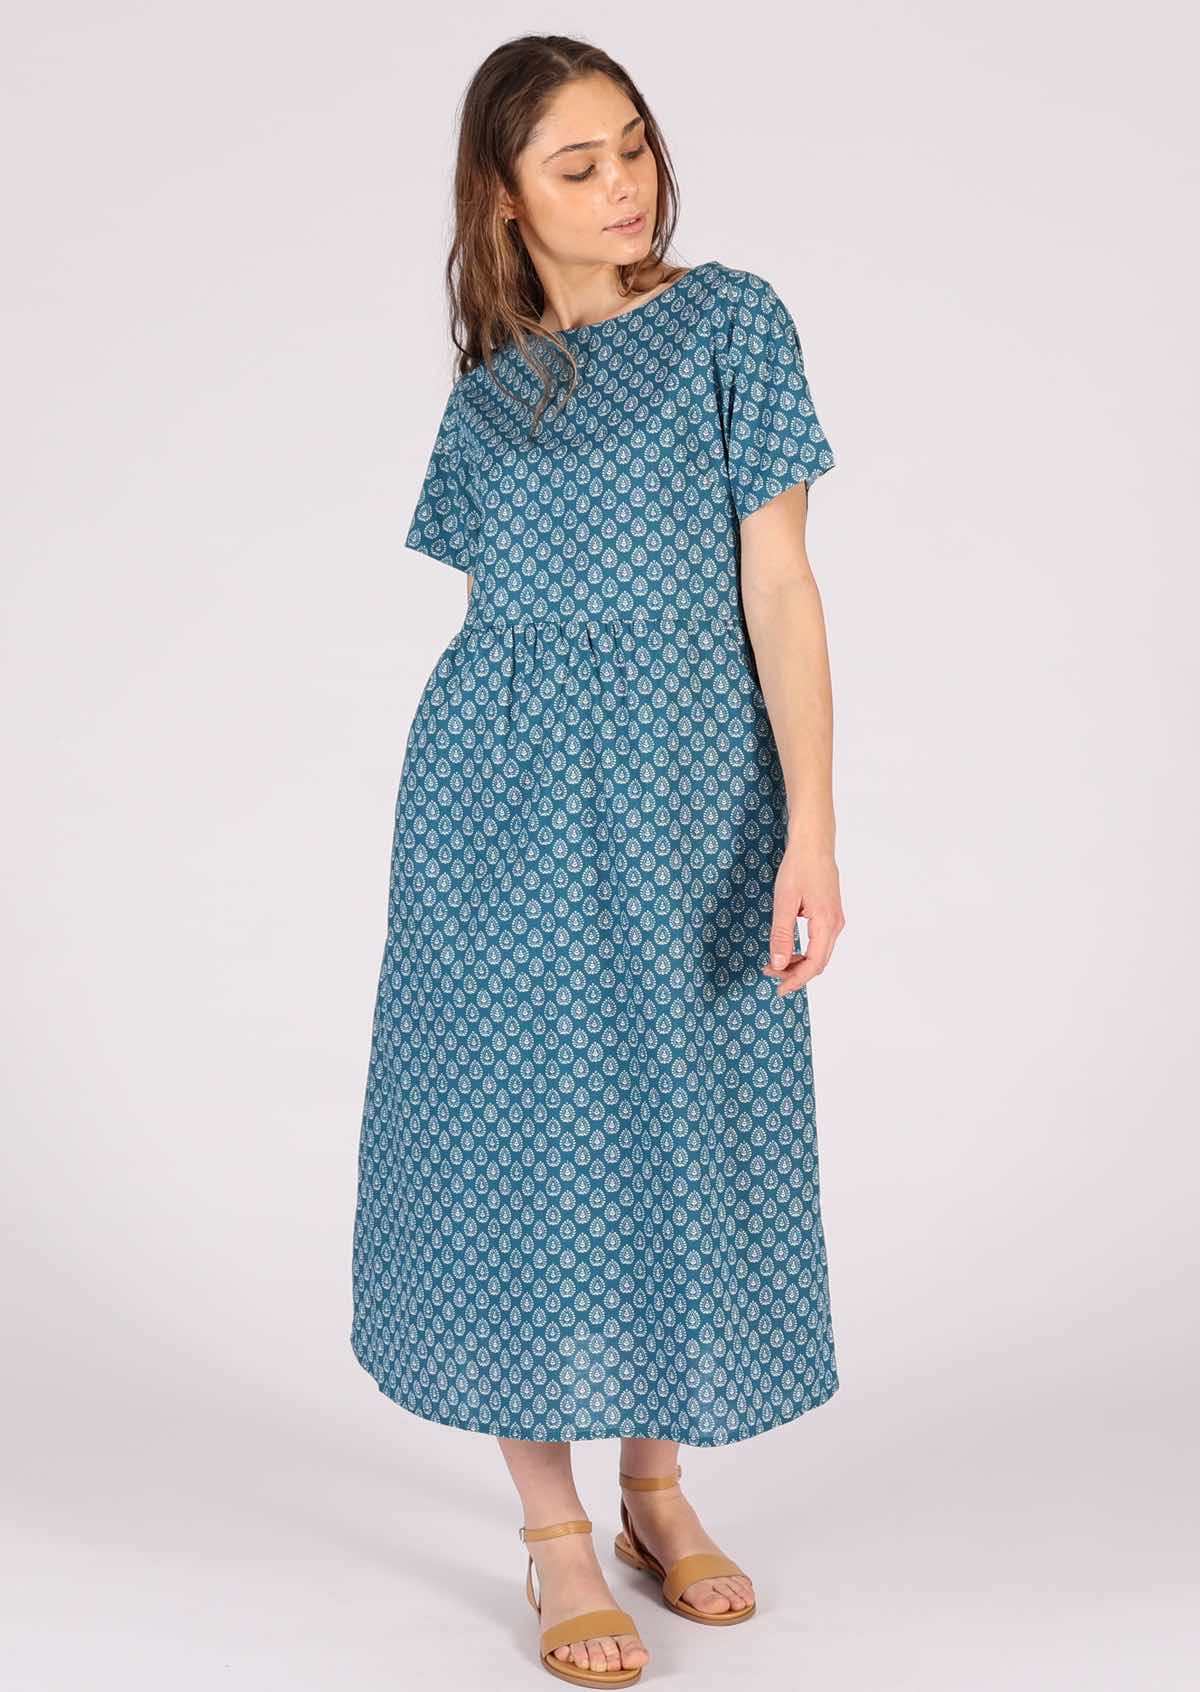 White pendant print on blue base cotton relaxed fit dress